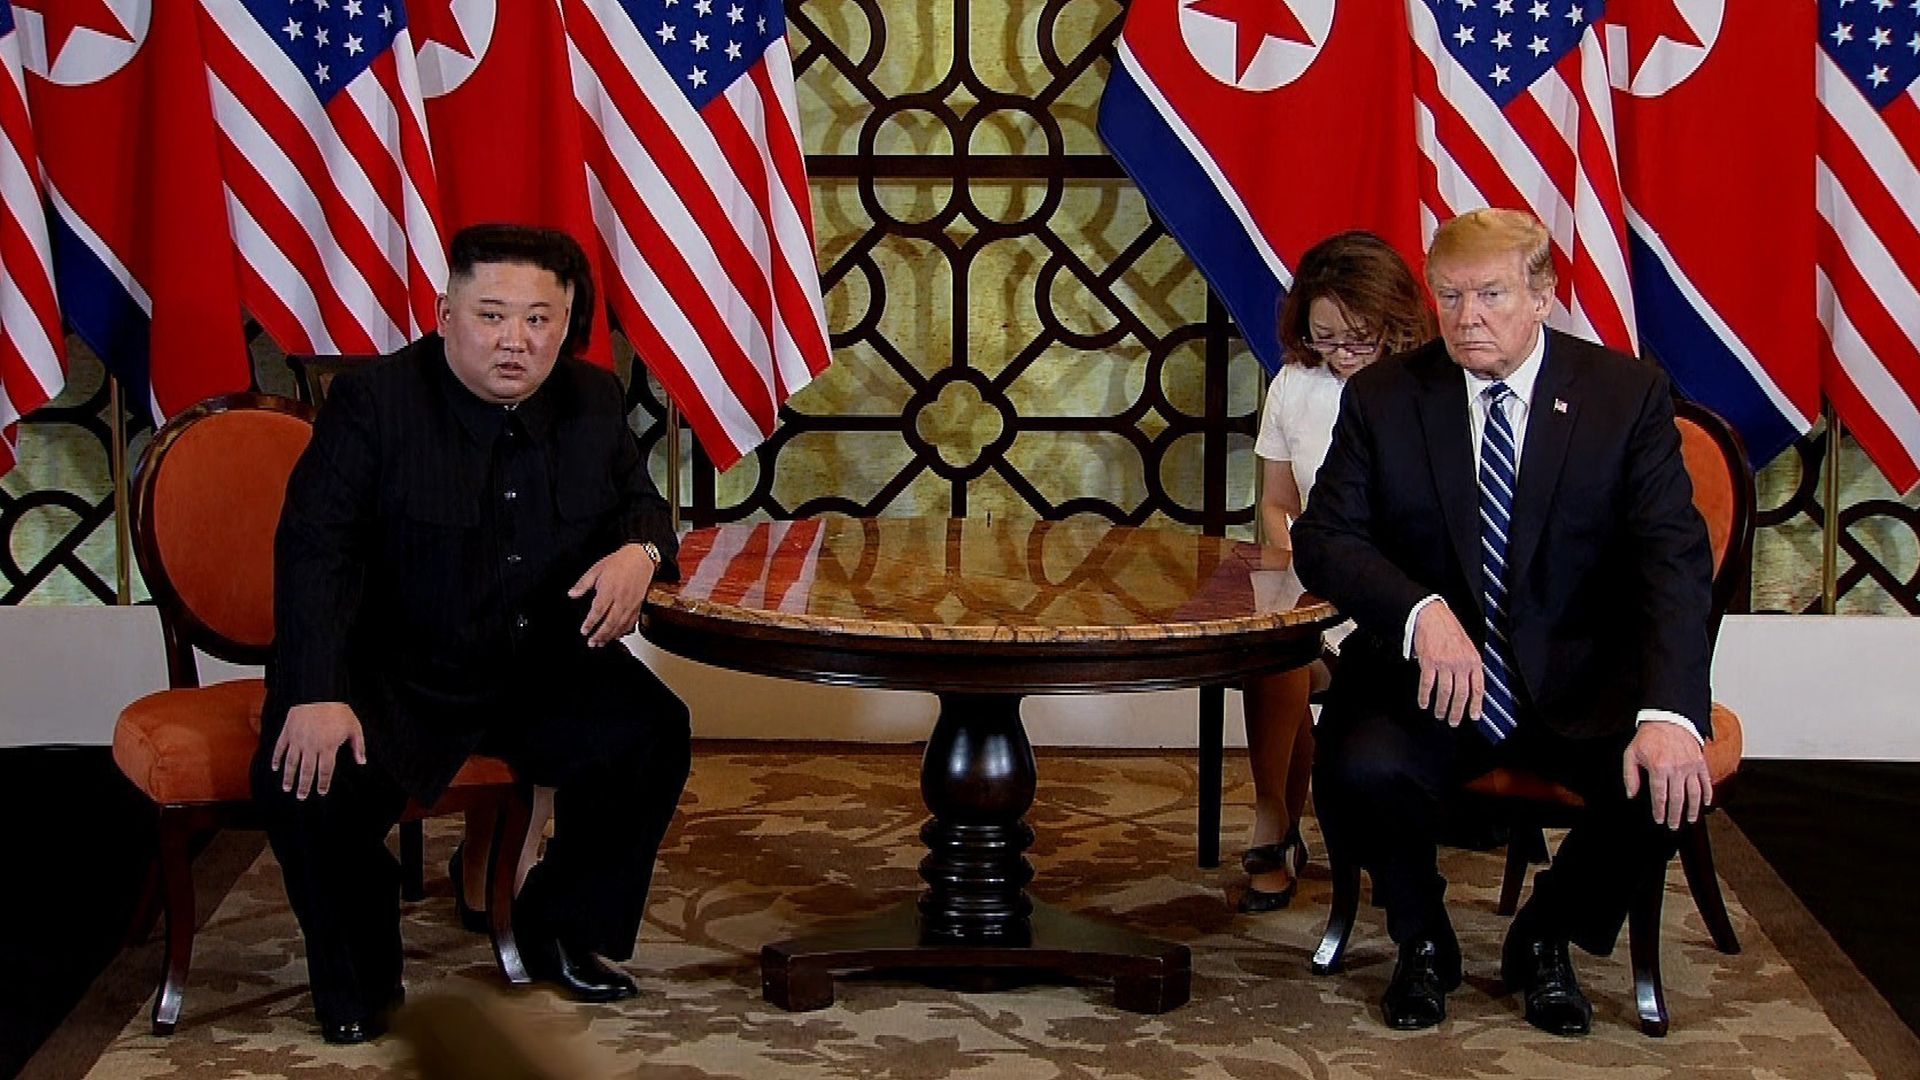 U.S. President Donald Trump (R) and North Korean leader Kim Jong-un (L) during their second summit meeting at the Sofitel Legend Metropole hotel on February 28, 2019 in Hanoi